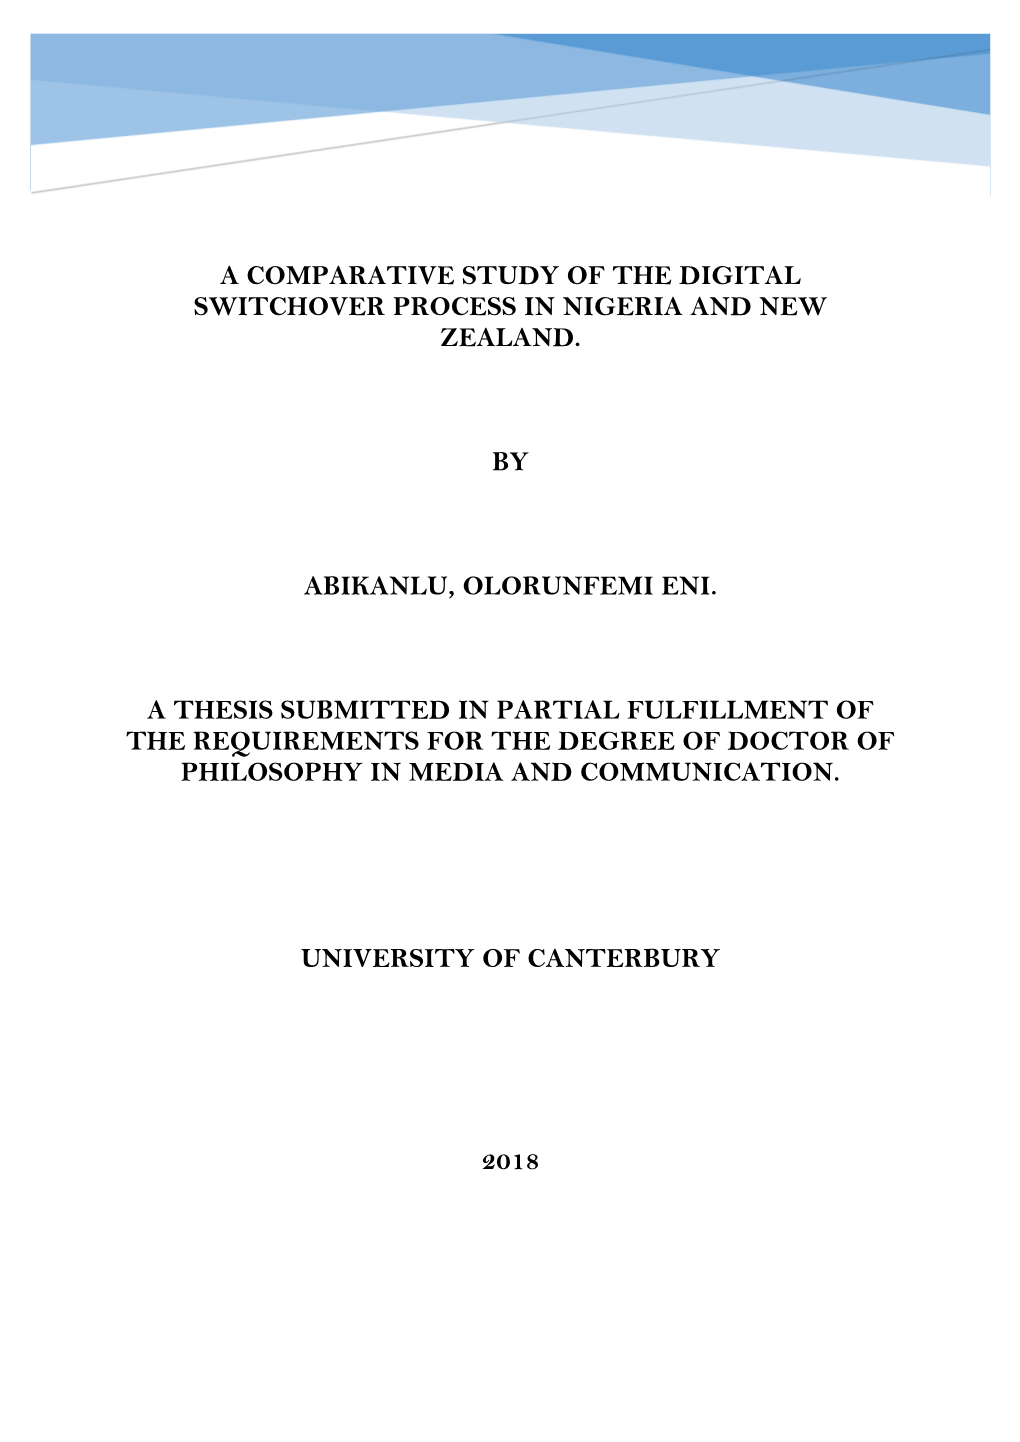 A Comparative Study of the Digital Switchover Process in Nigeria and New Zealand